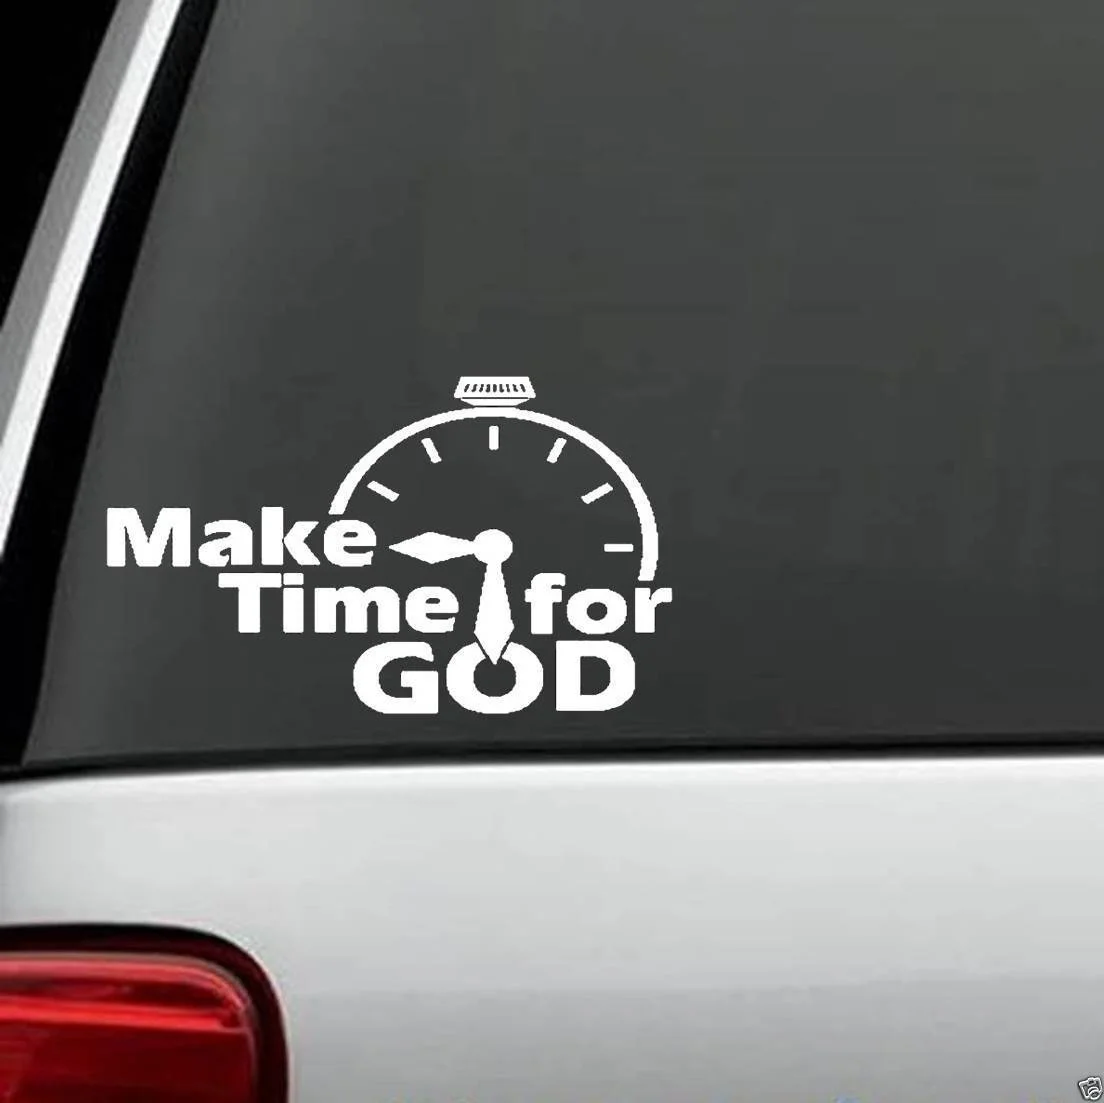 

For Make Time for God Decal Sticker Christian Faith Church Religion Bible Love Car Styling